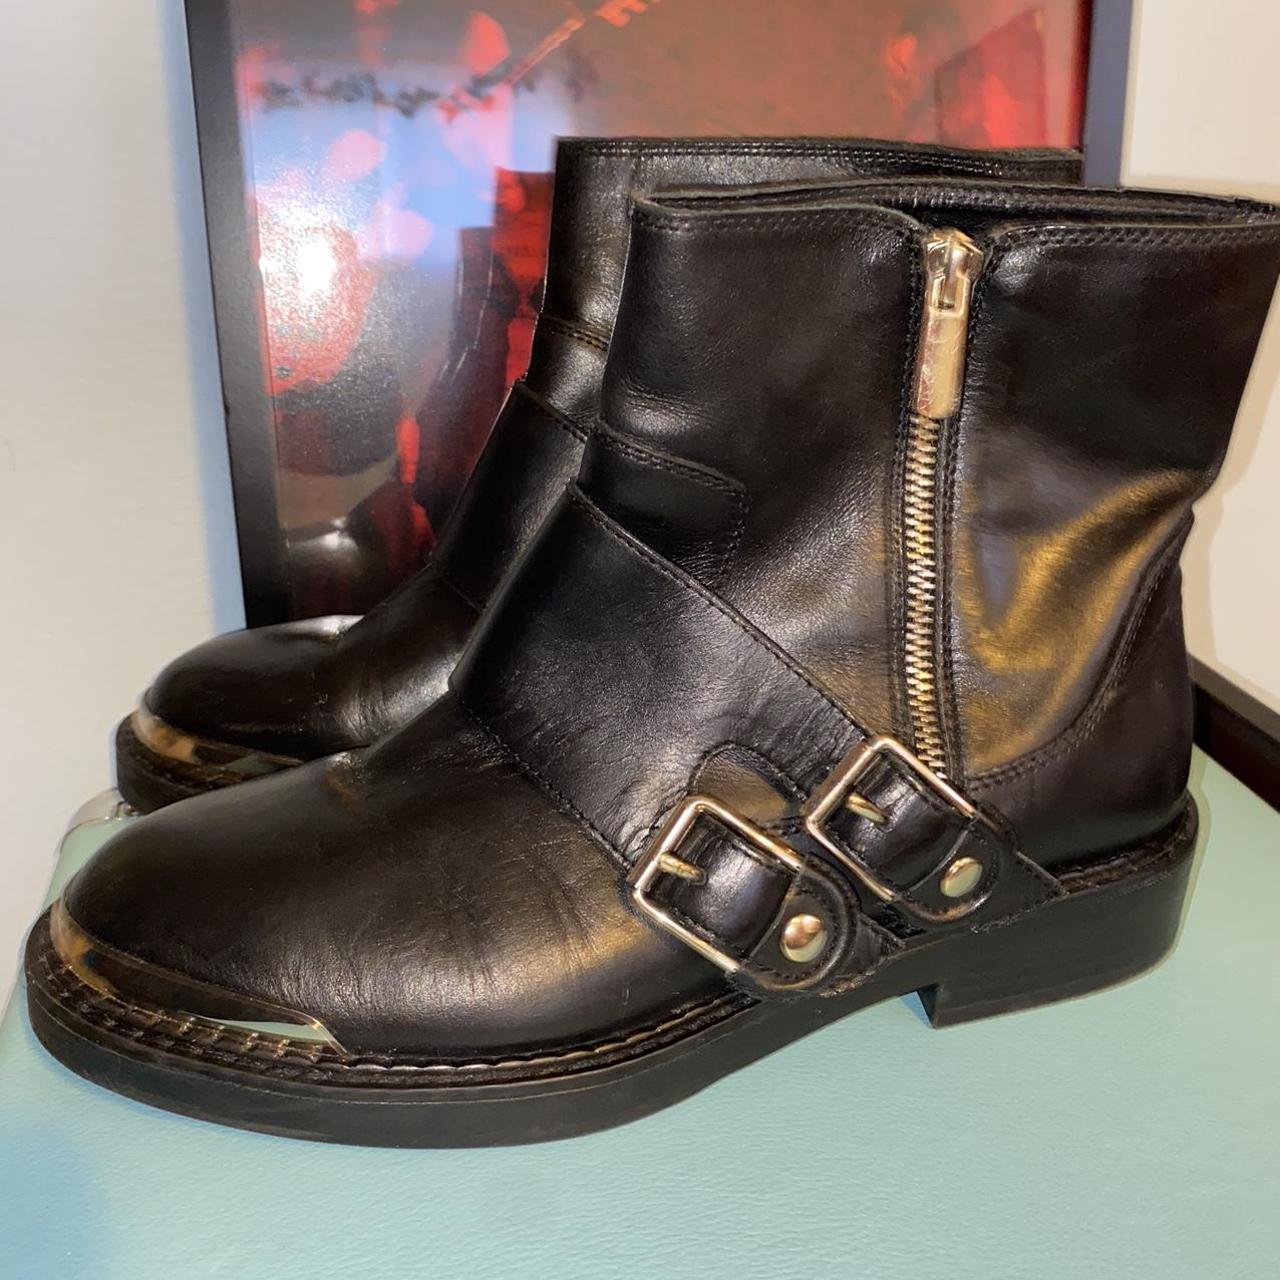 Zara Women's Black and Gold Boots (2)